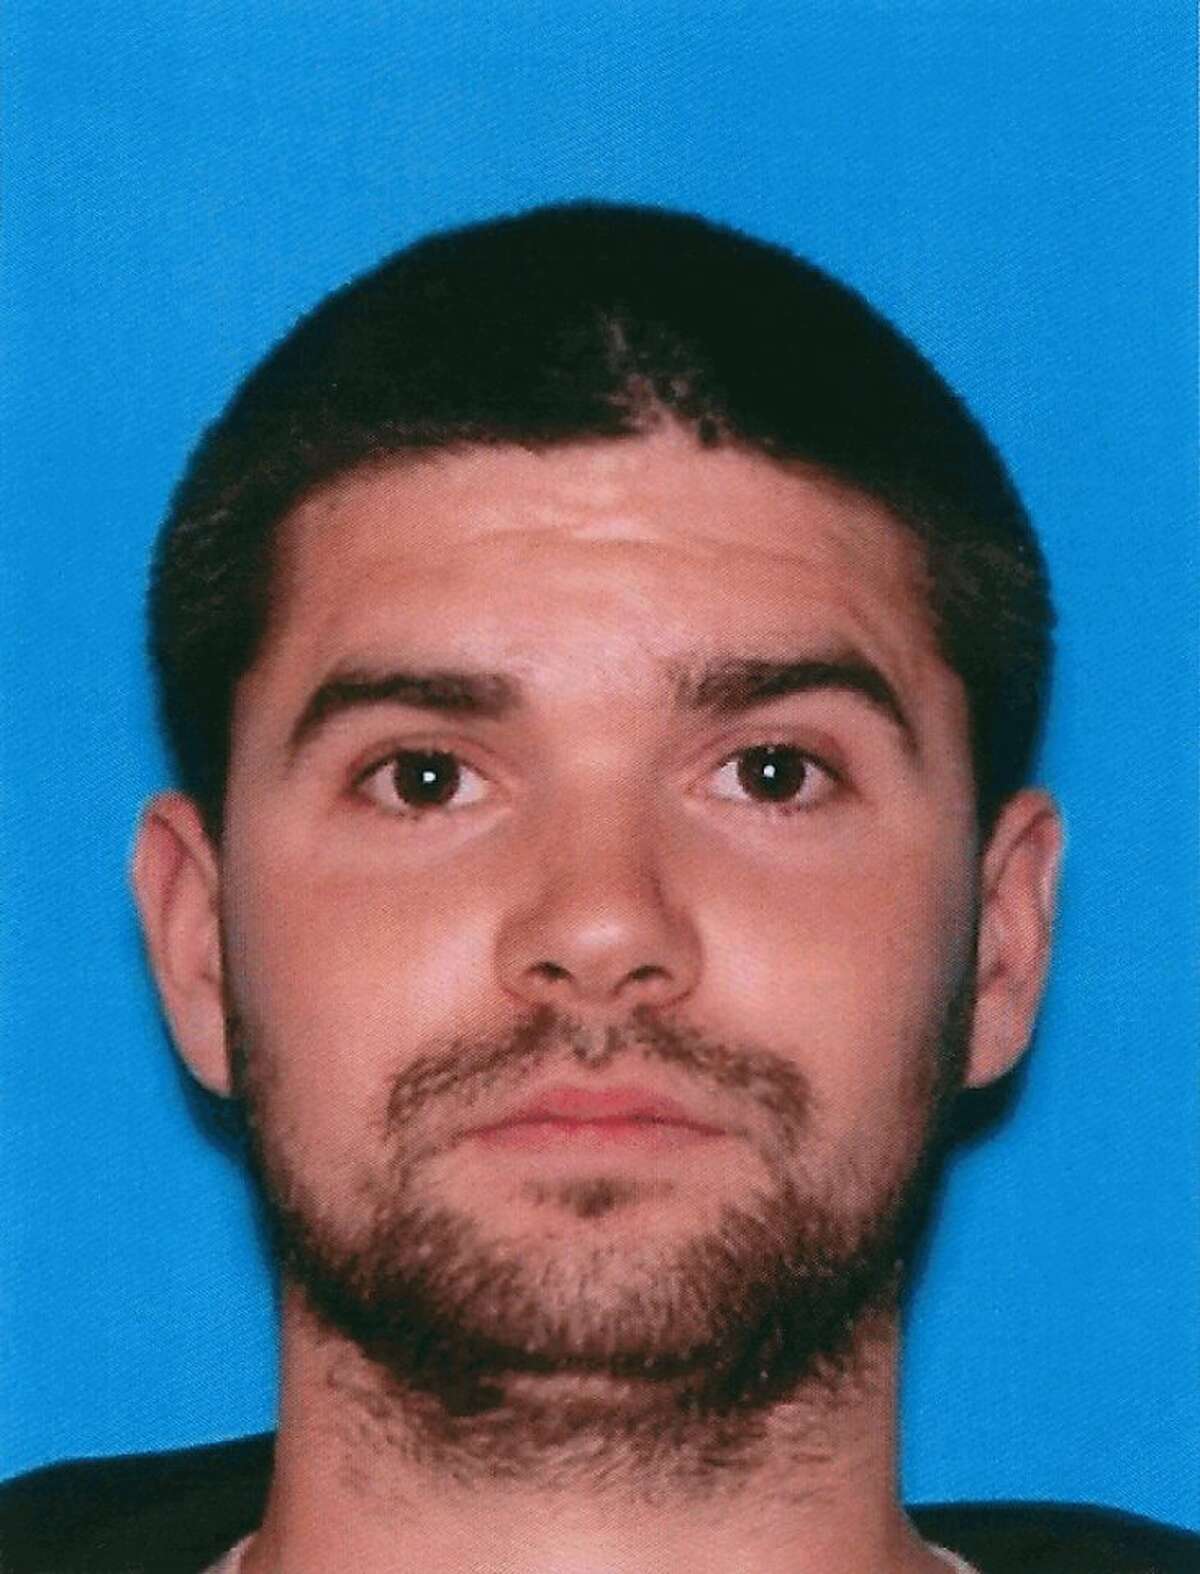 Jonathan Denver, 24, who worked as a plumberÕs apprentice in Fort Bragg (Mendocino County), was stabbed blocks away from AT&T Park on Wednesday night.